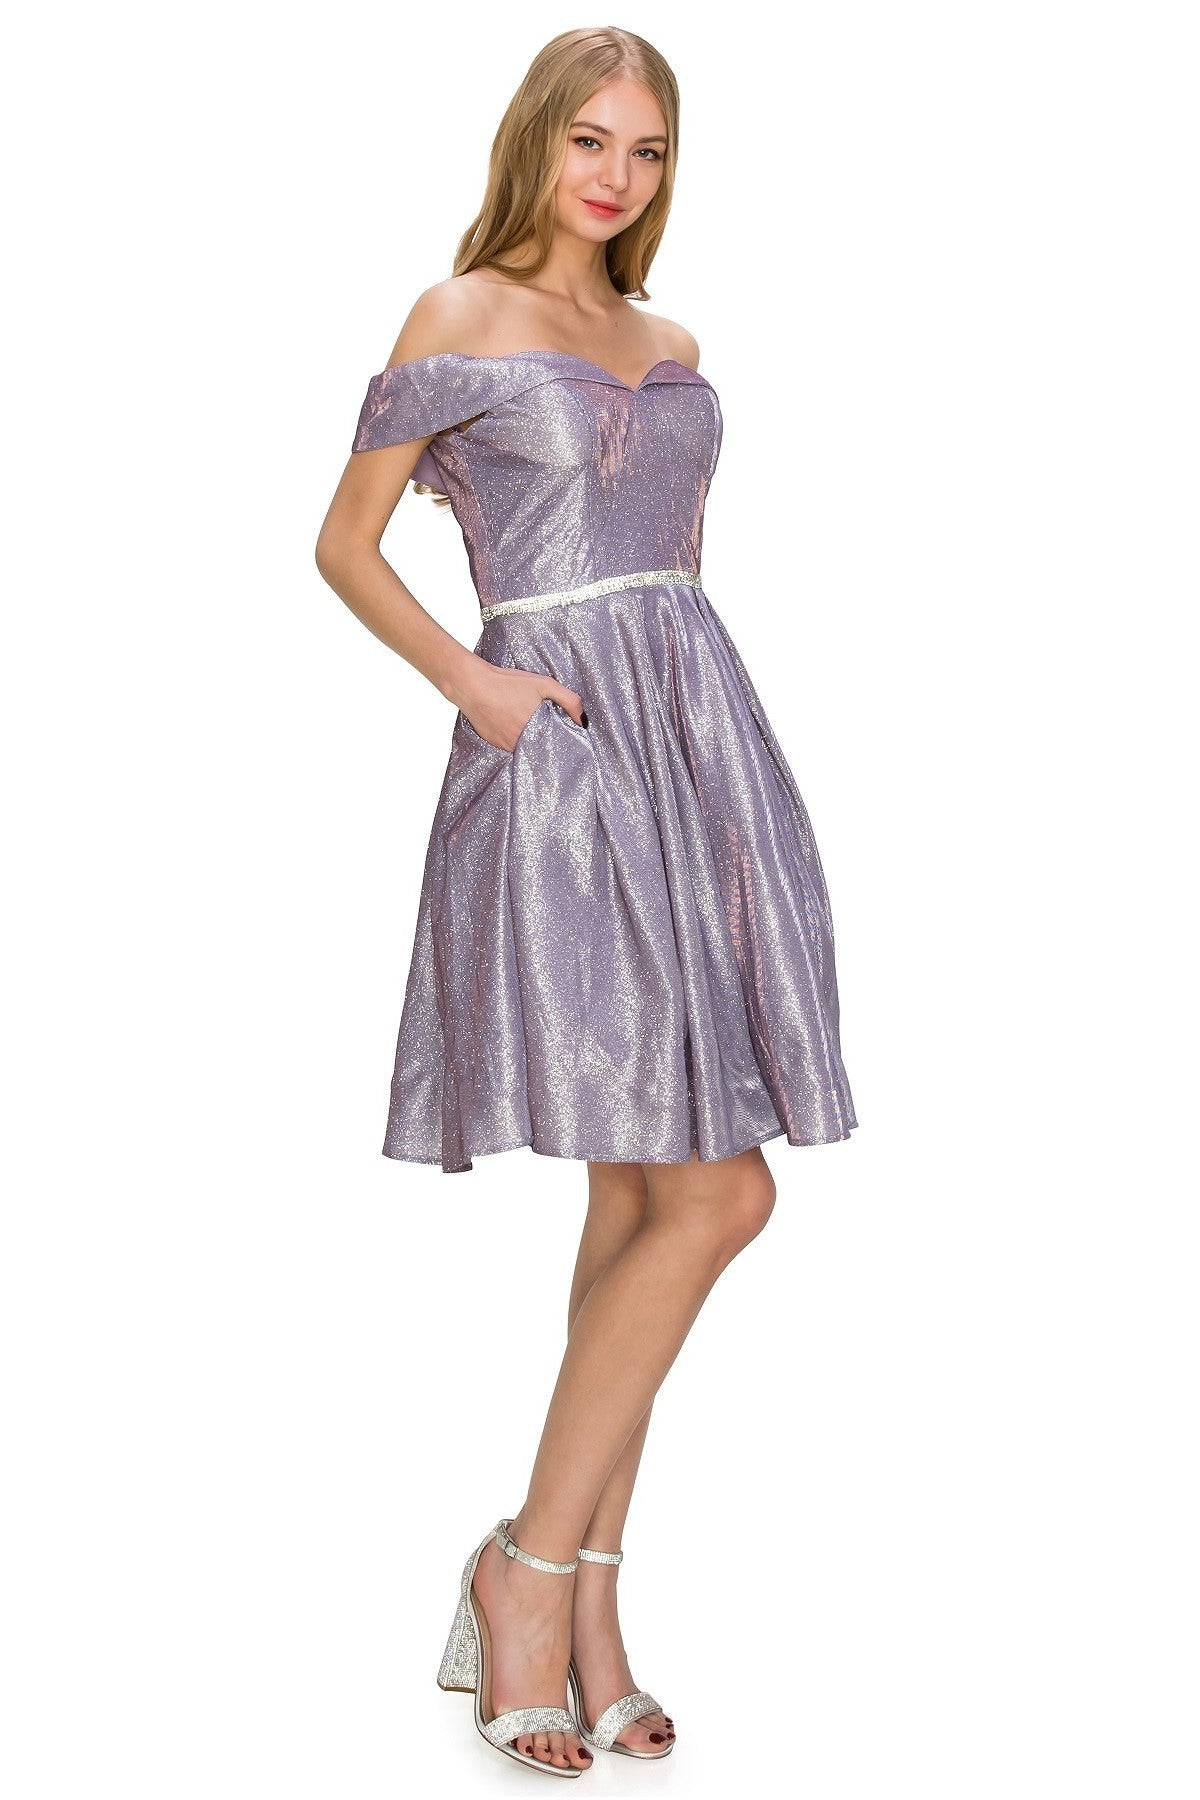 Off the Shoulder Glitter Short Party Dress by Cinderella Couture USA AS8012J-LILAC